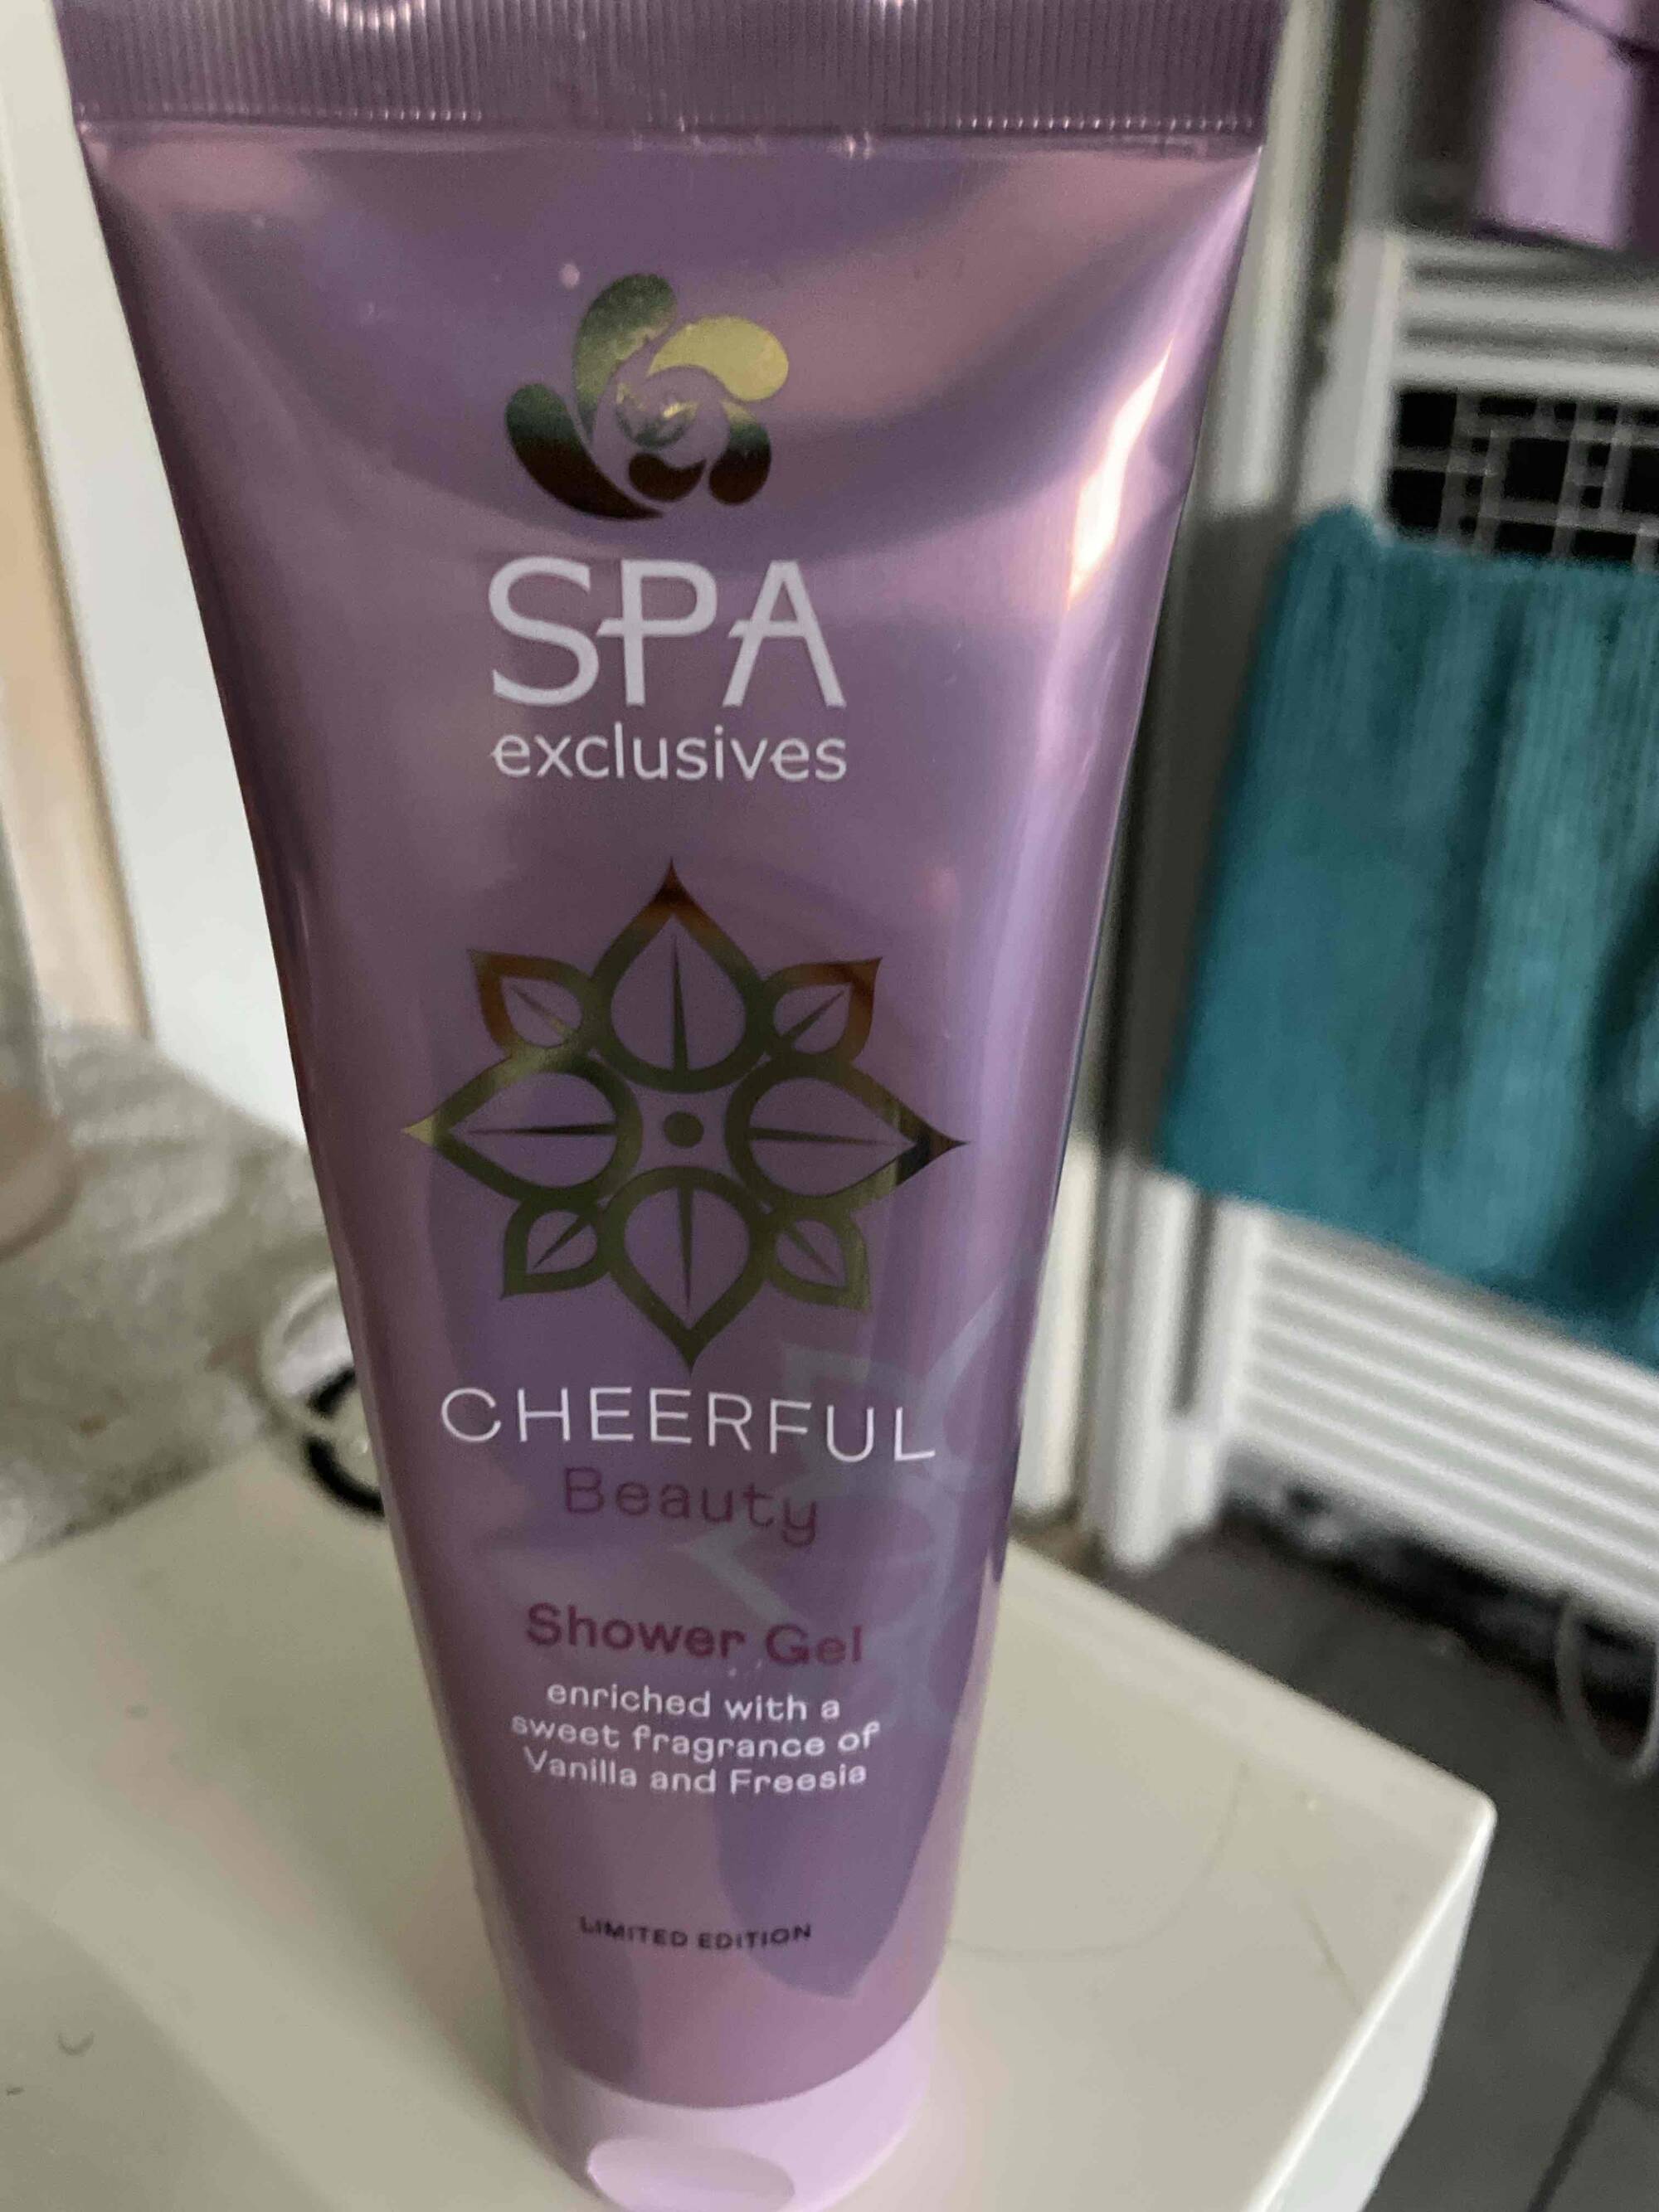 SPA EXCLUSIVES - Cheerful beauty - Shower gel